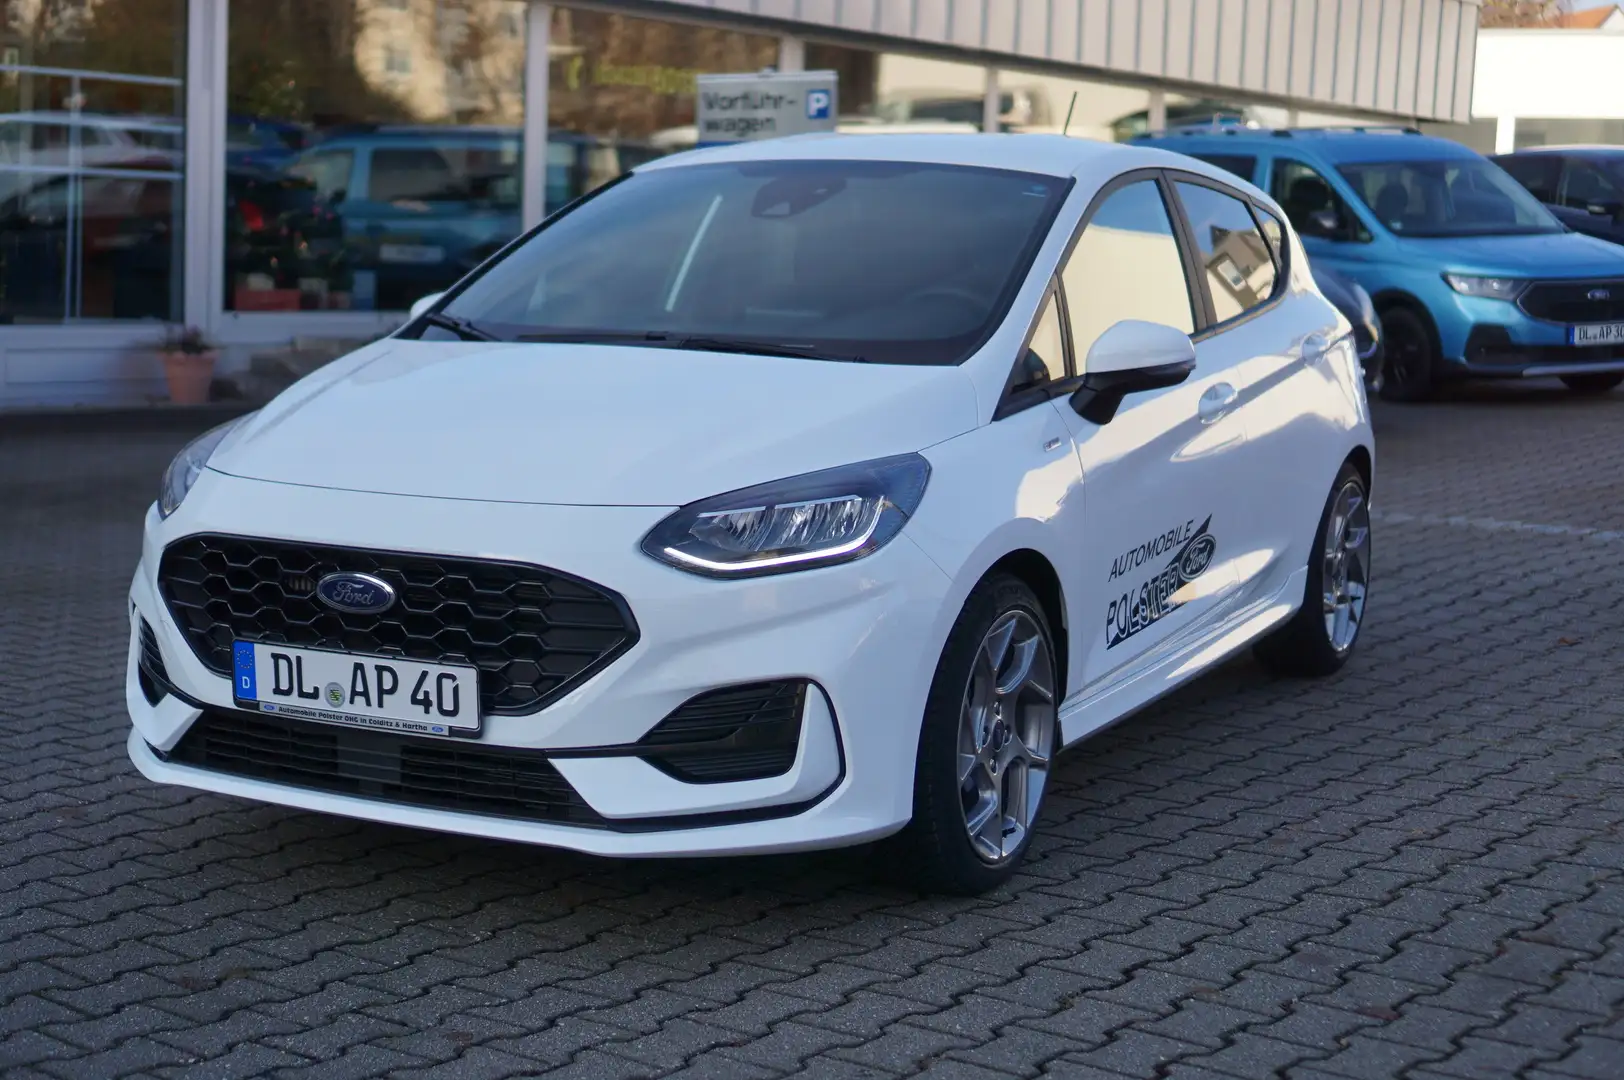 Used Ford Fiesta 